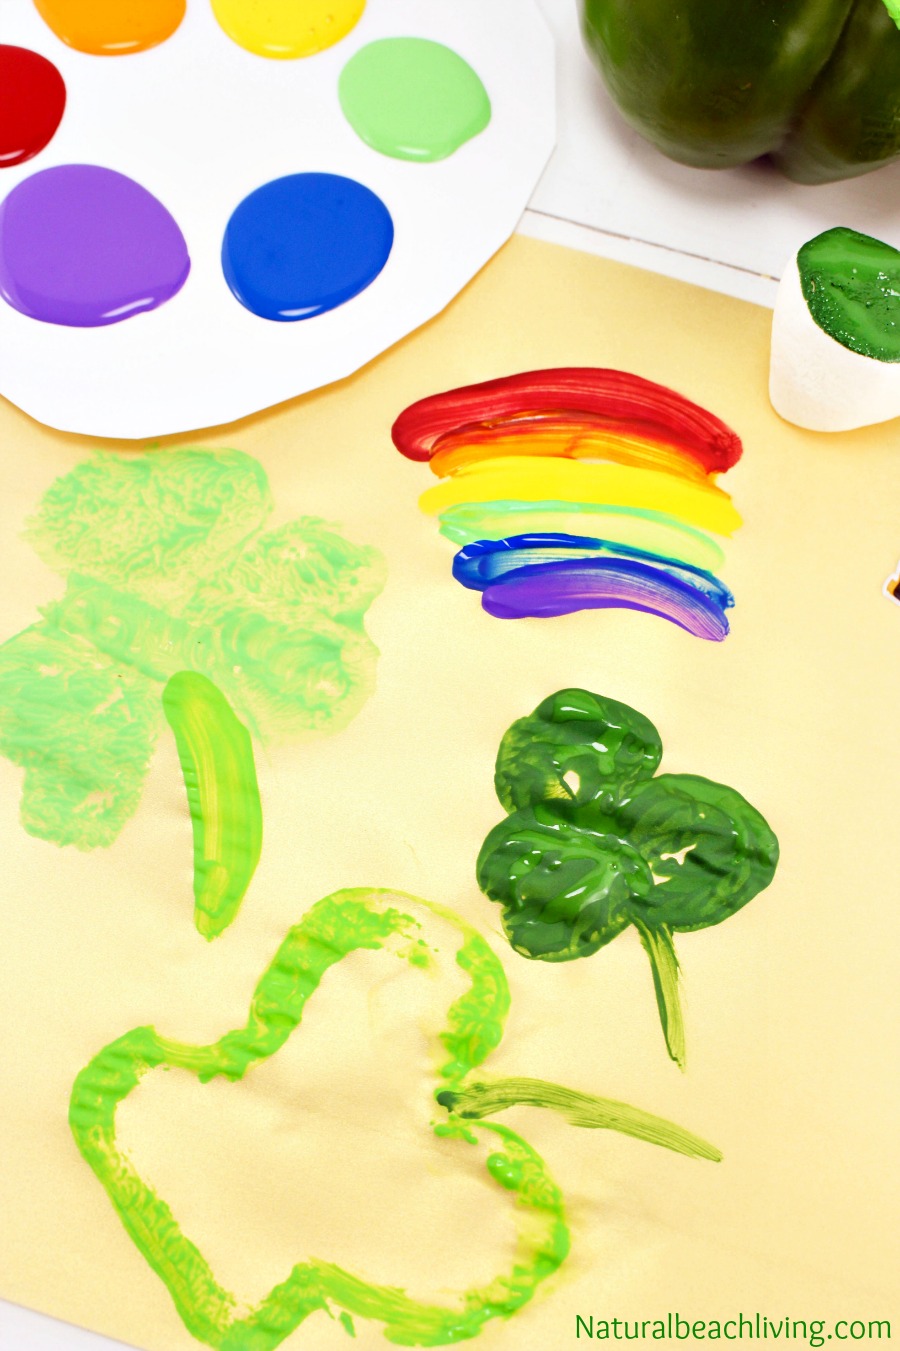 St. Patrick's Day Crafts, Marshmallow Stamping, Rainbow crafts for kids